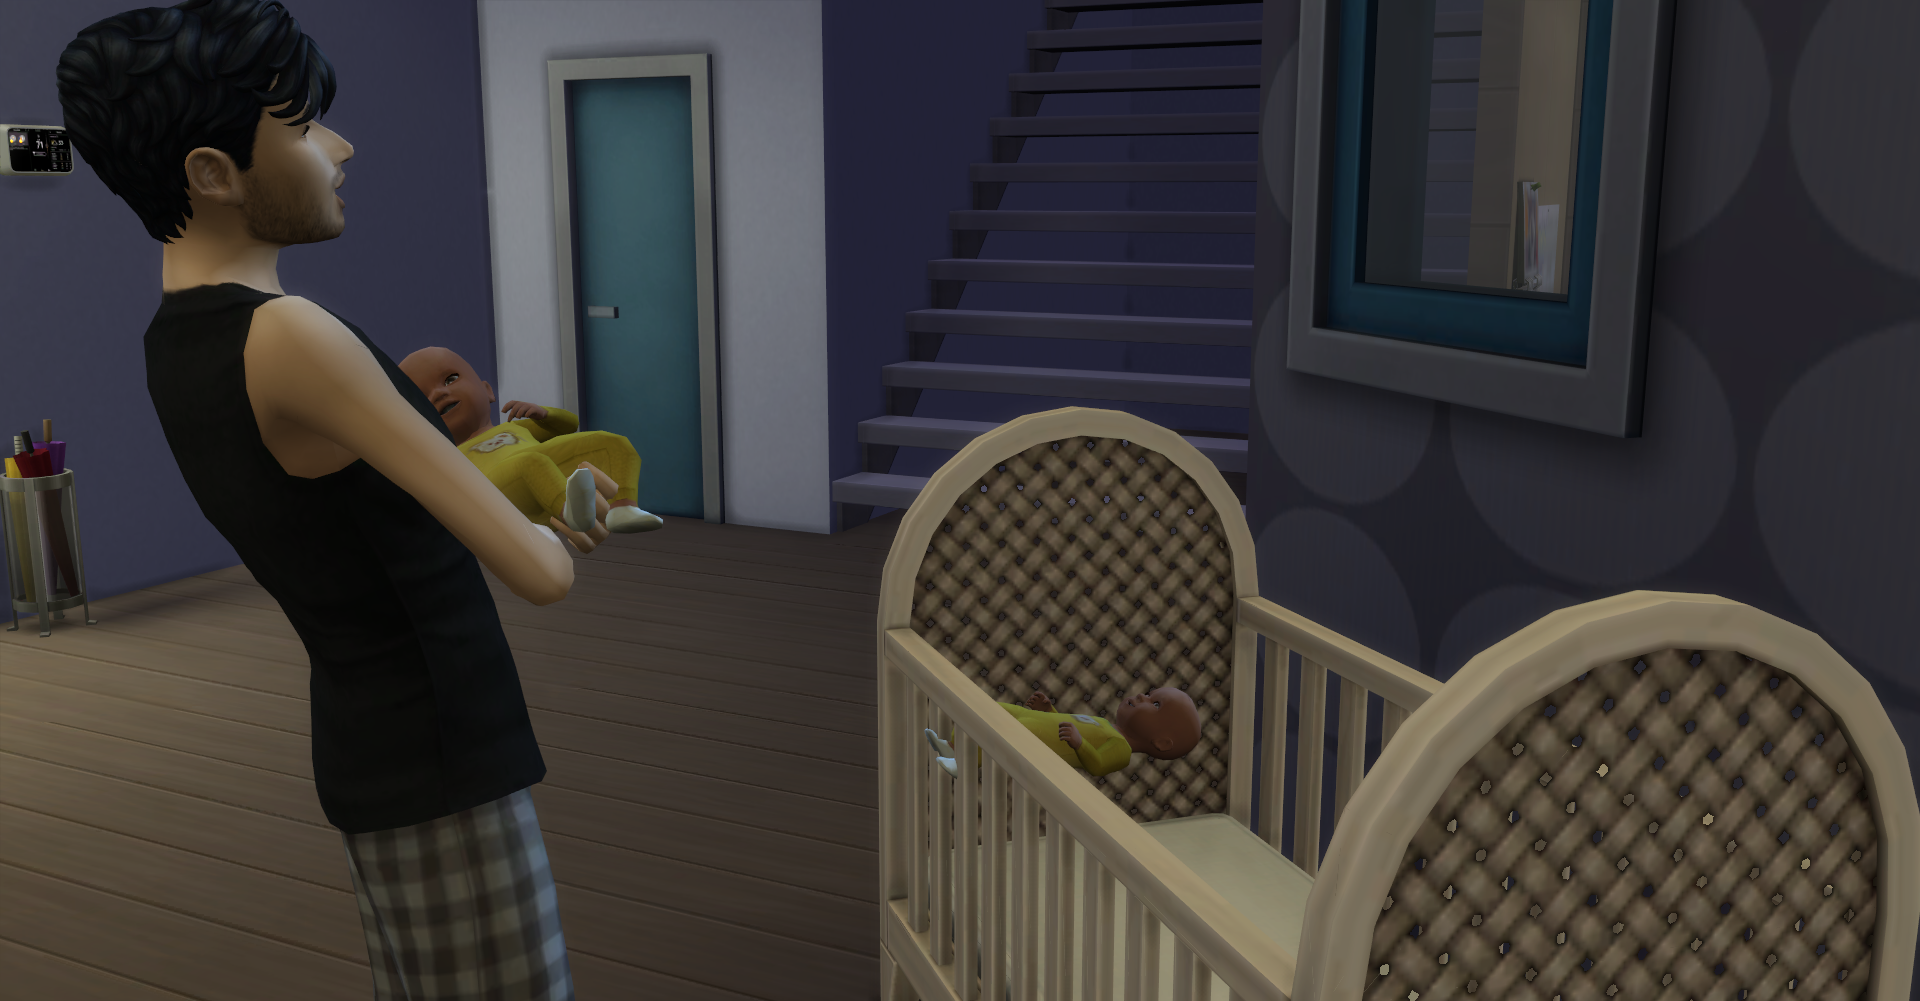 100 baby challenge (masculin) - Page 3 7sjp